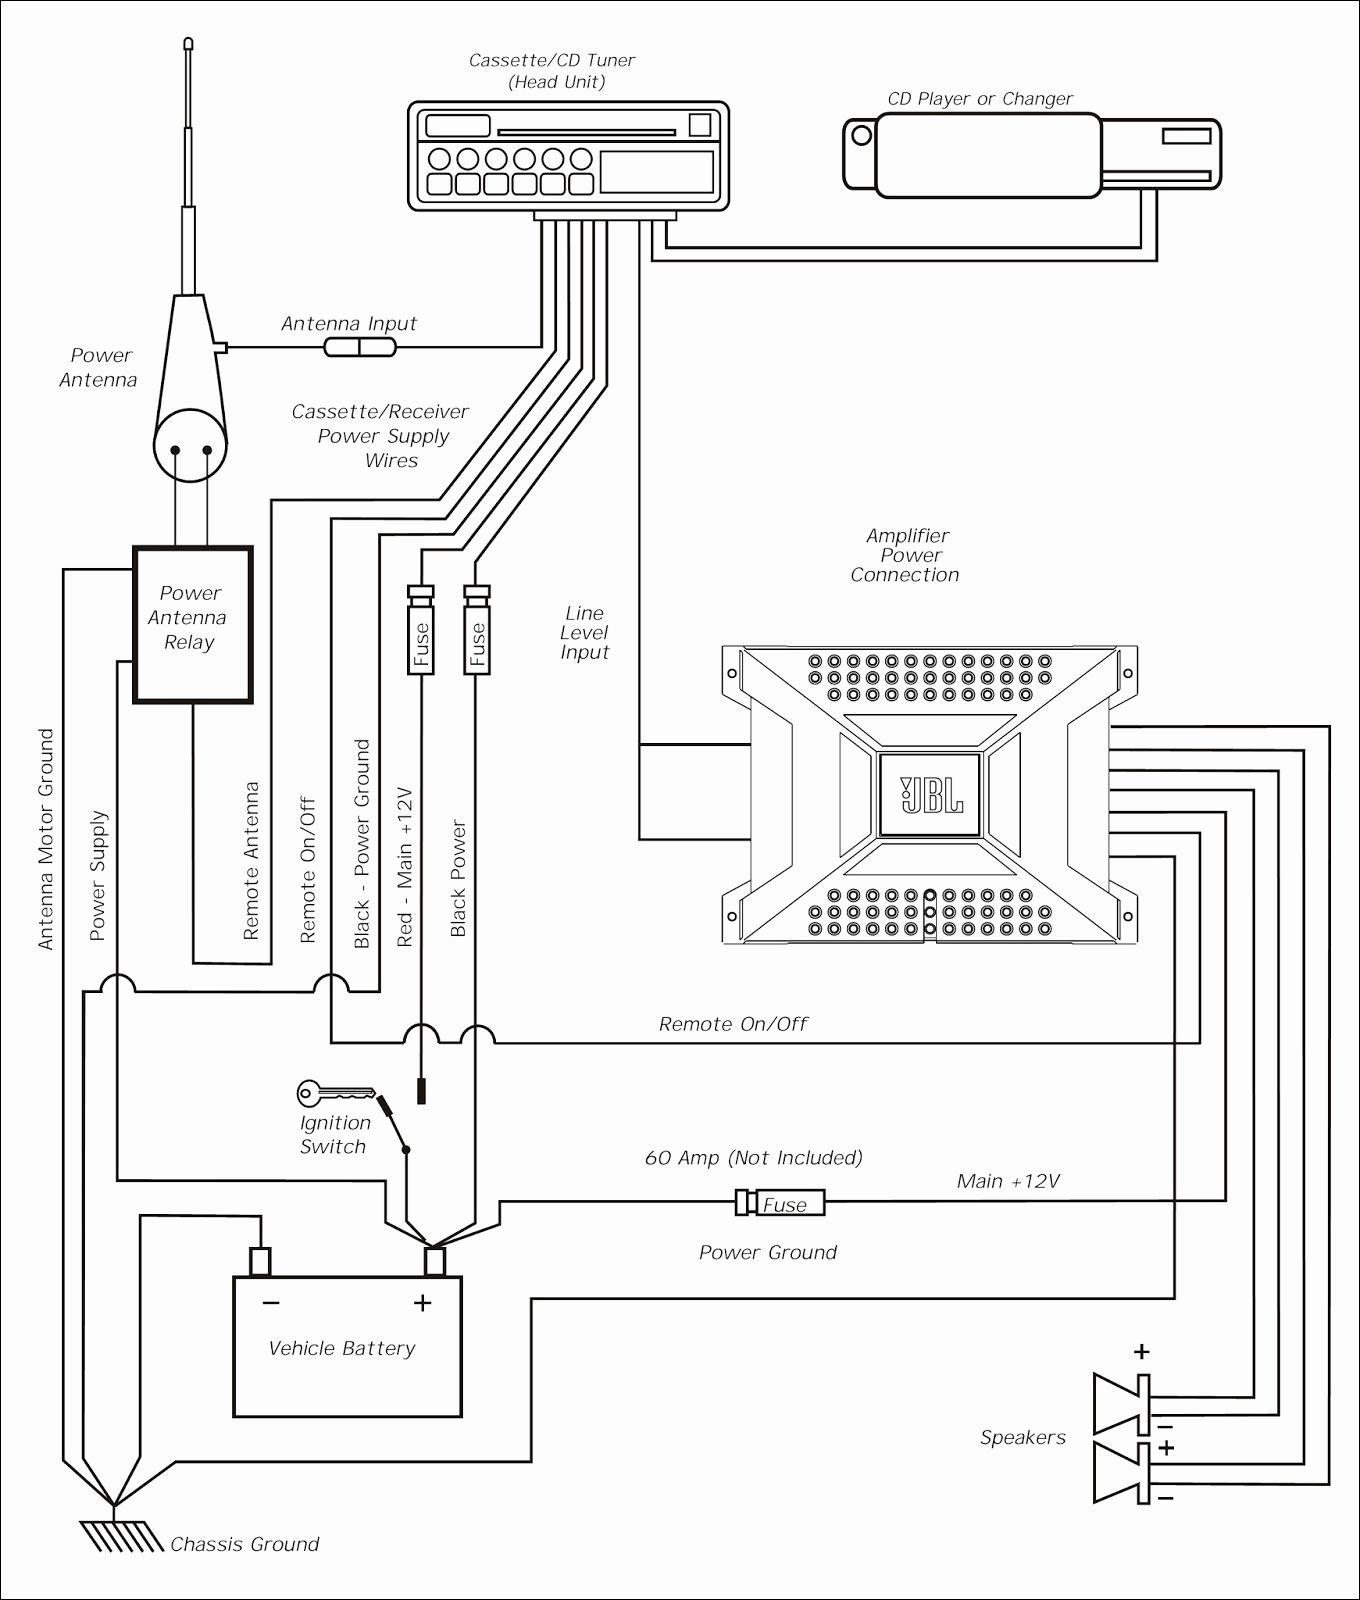 Wiring Diagram Cat5 Ethernet Cable B - Data Wiring Diagram Site - Cat5 Wiring Diagram B